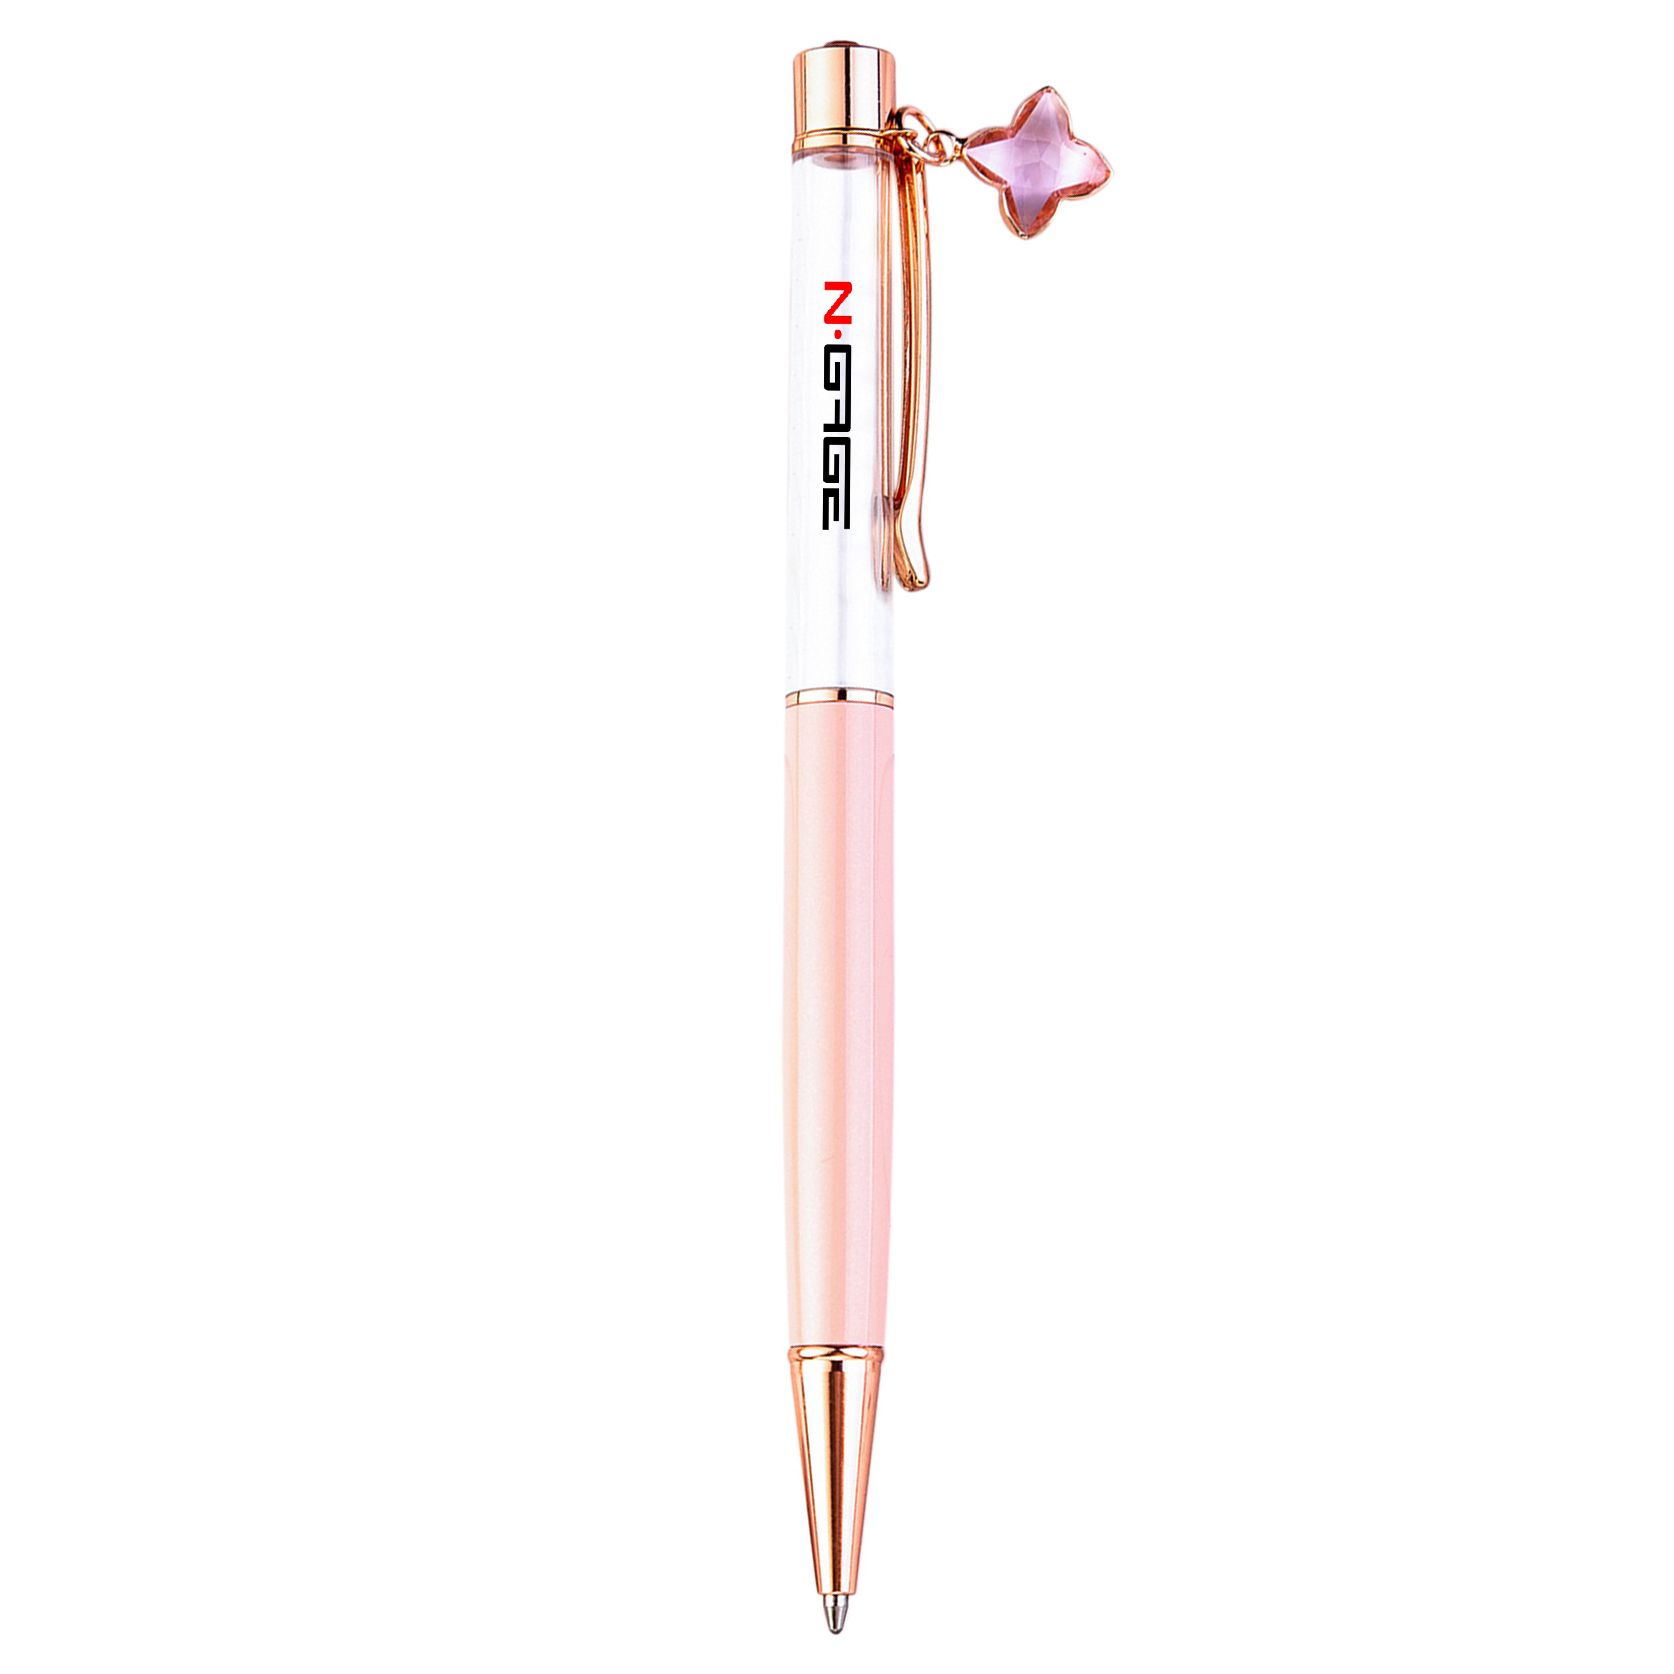 Custom Colorful Crystal Metal Ballpoint Pen With Four-Leaf Clover